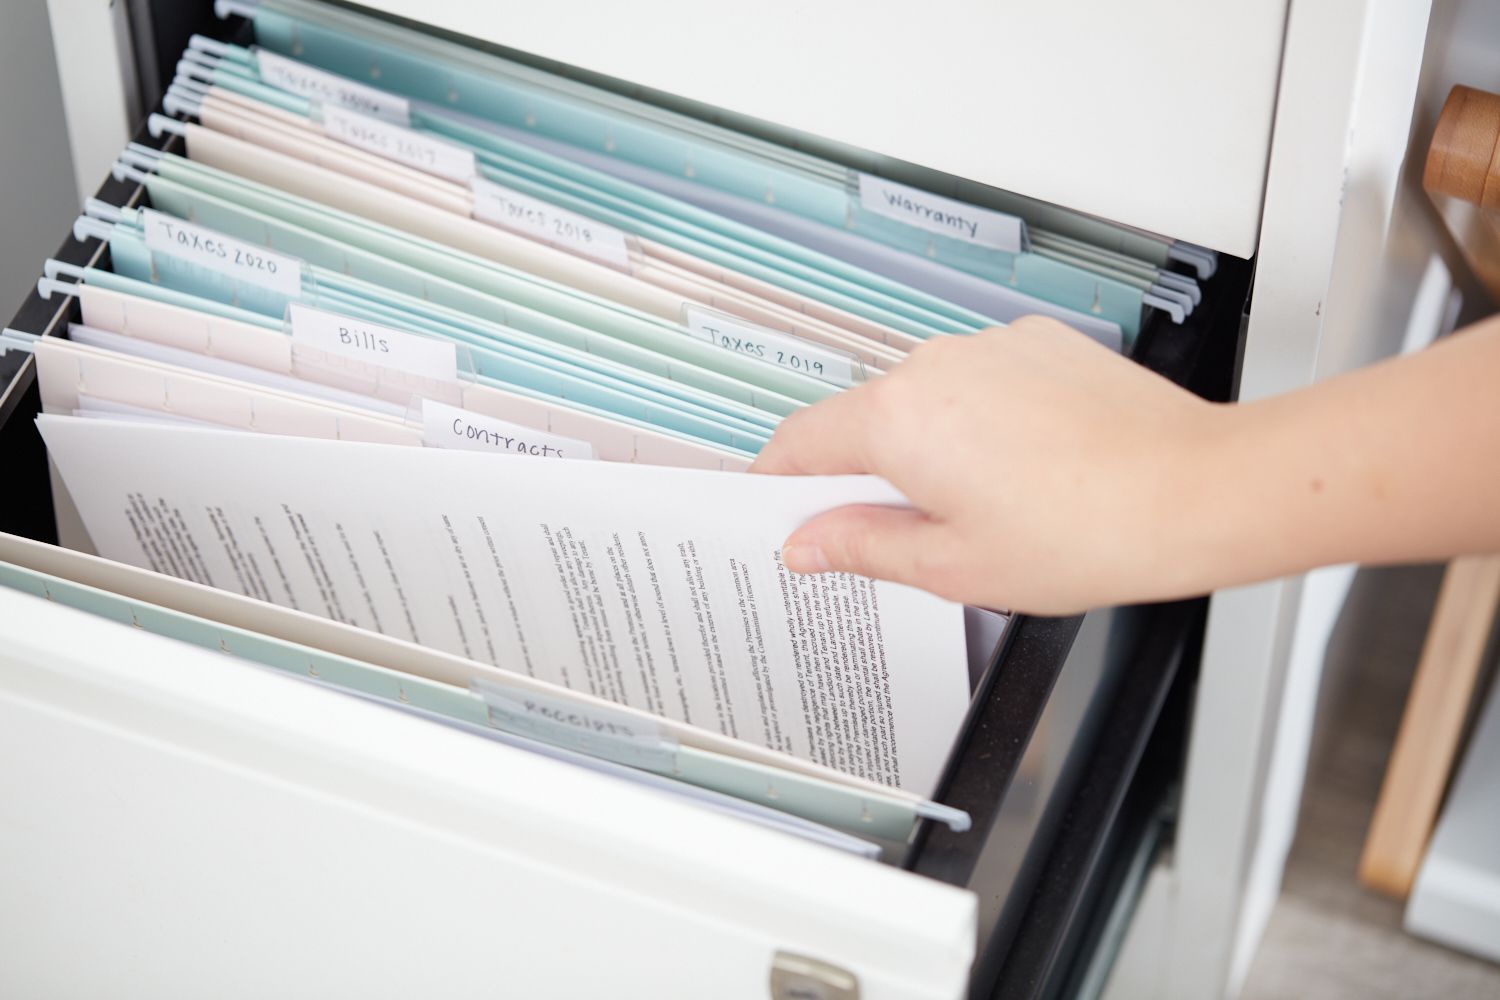 How To Store Documents At Home